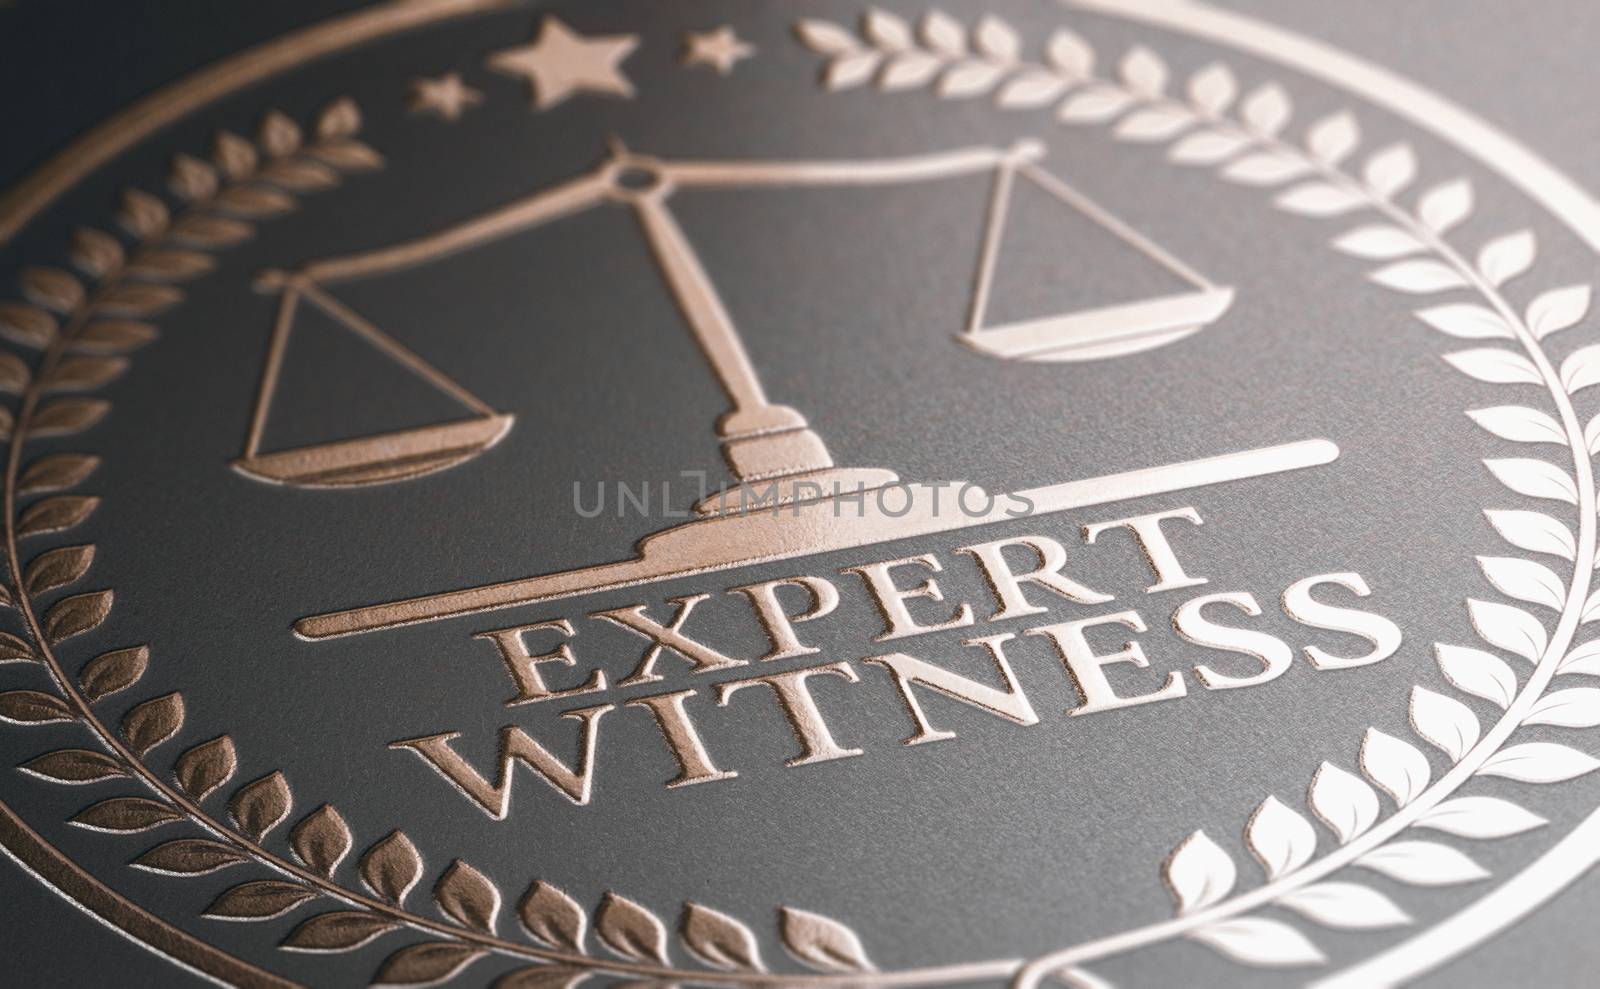 Legal Expertise. Expert Witness Service by Olivier-Le-Moal